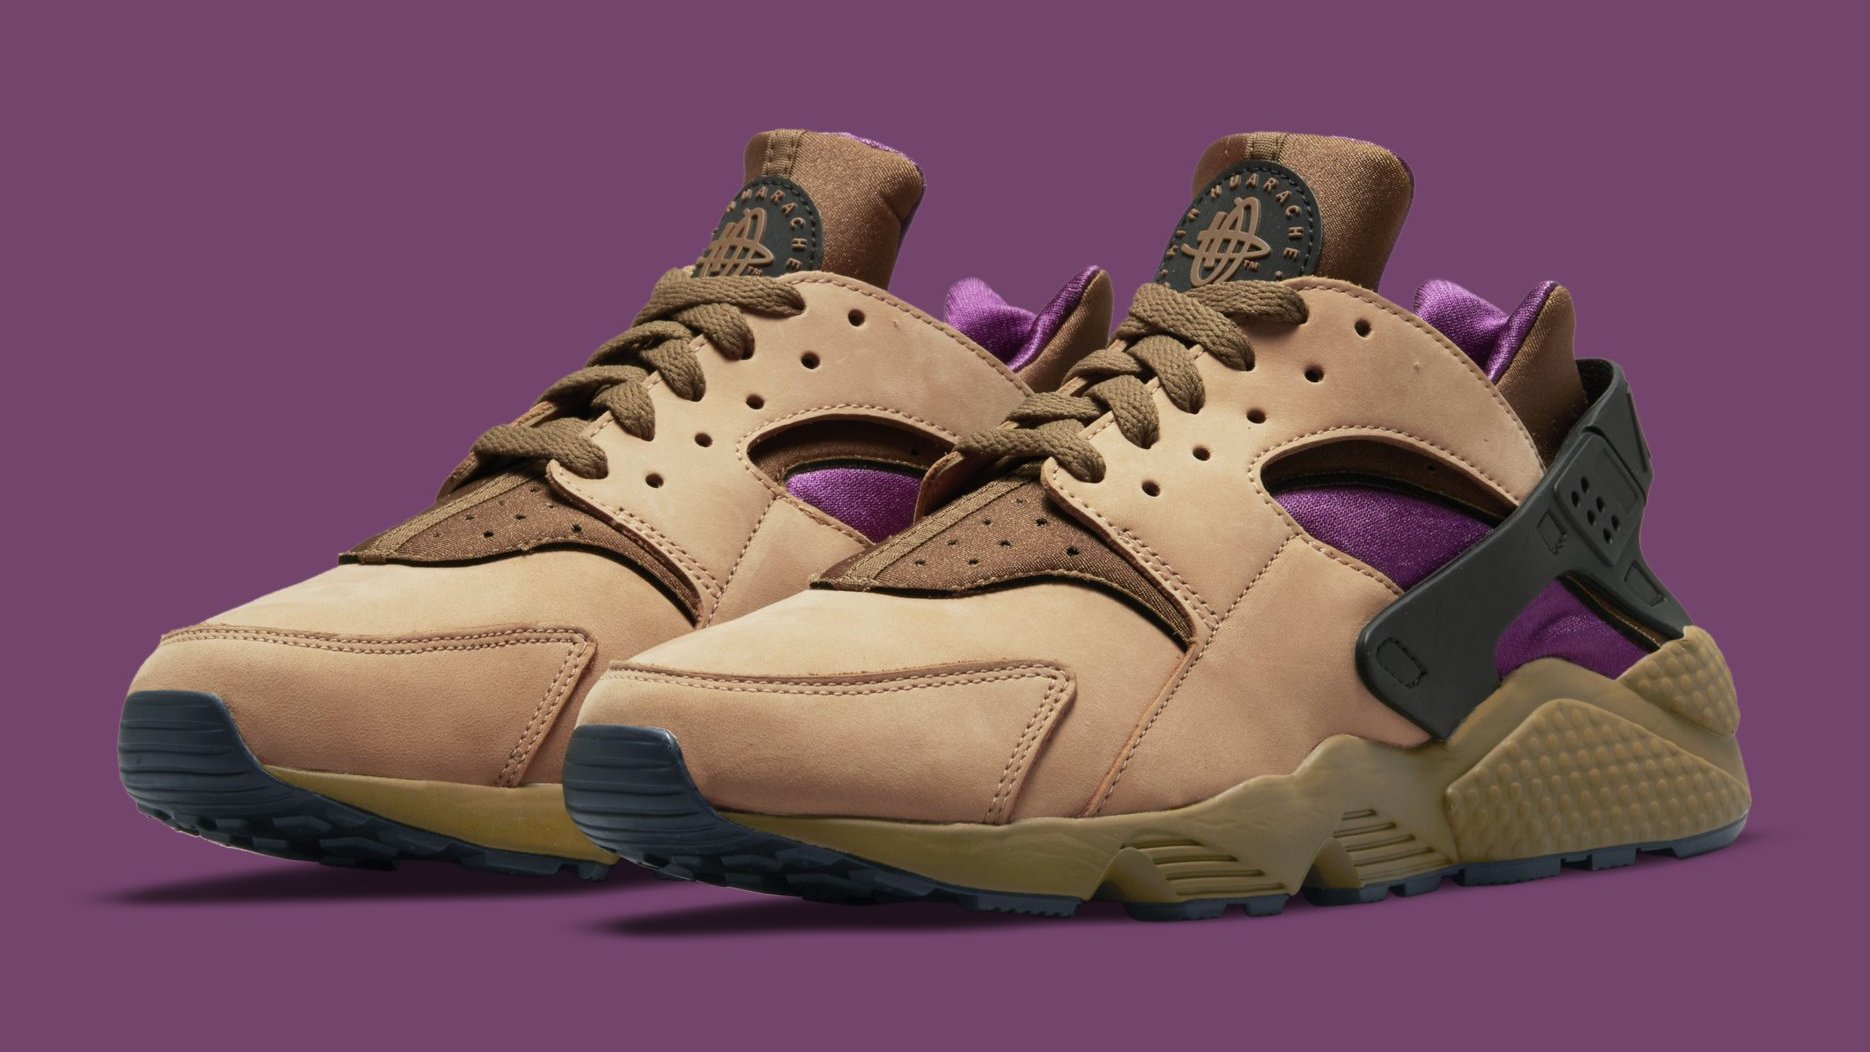 Another Nike Air Huarache Colorway Coming Back | Complex